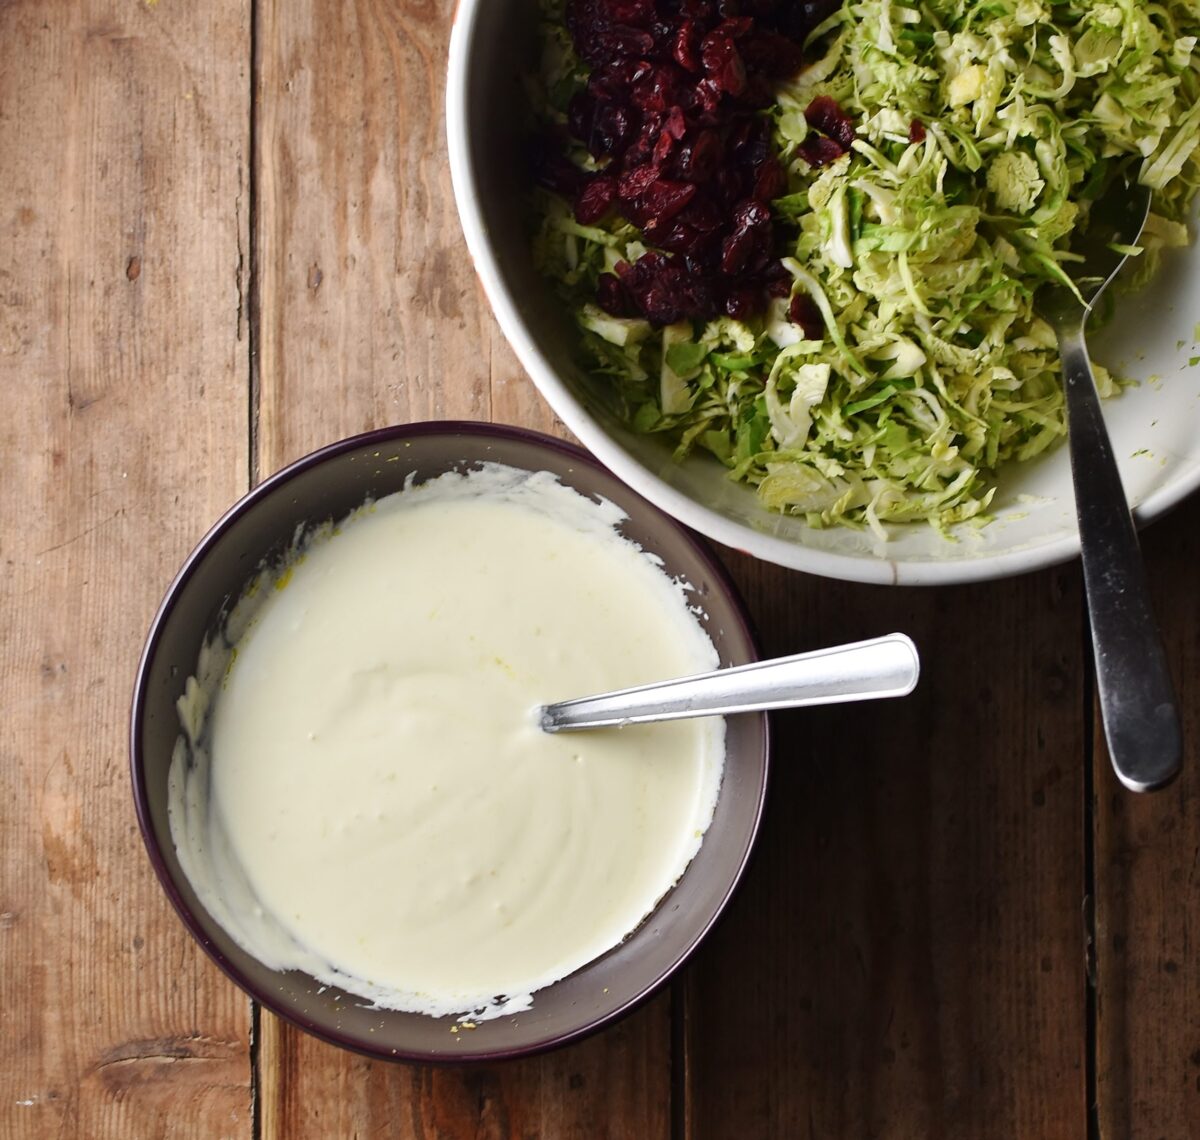 Creamy dressing with spoon in purple bowl, and shredded sprouts with cranberries and spoon in metal bowl.